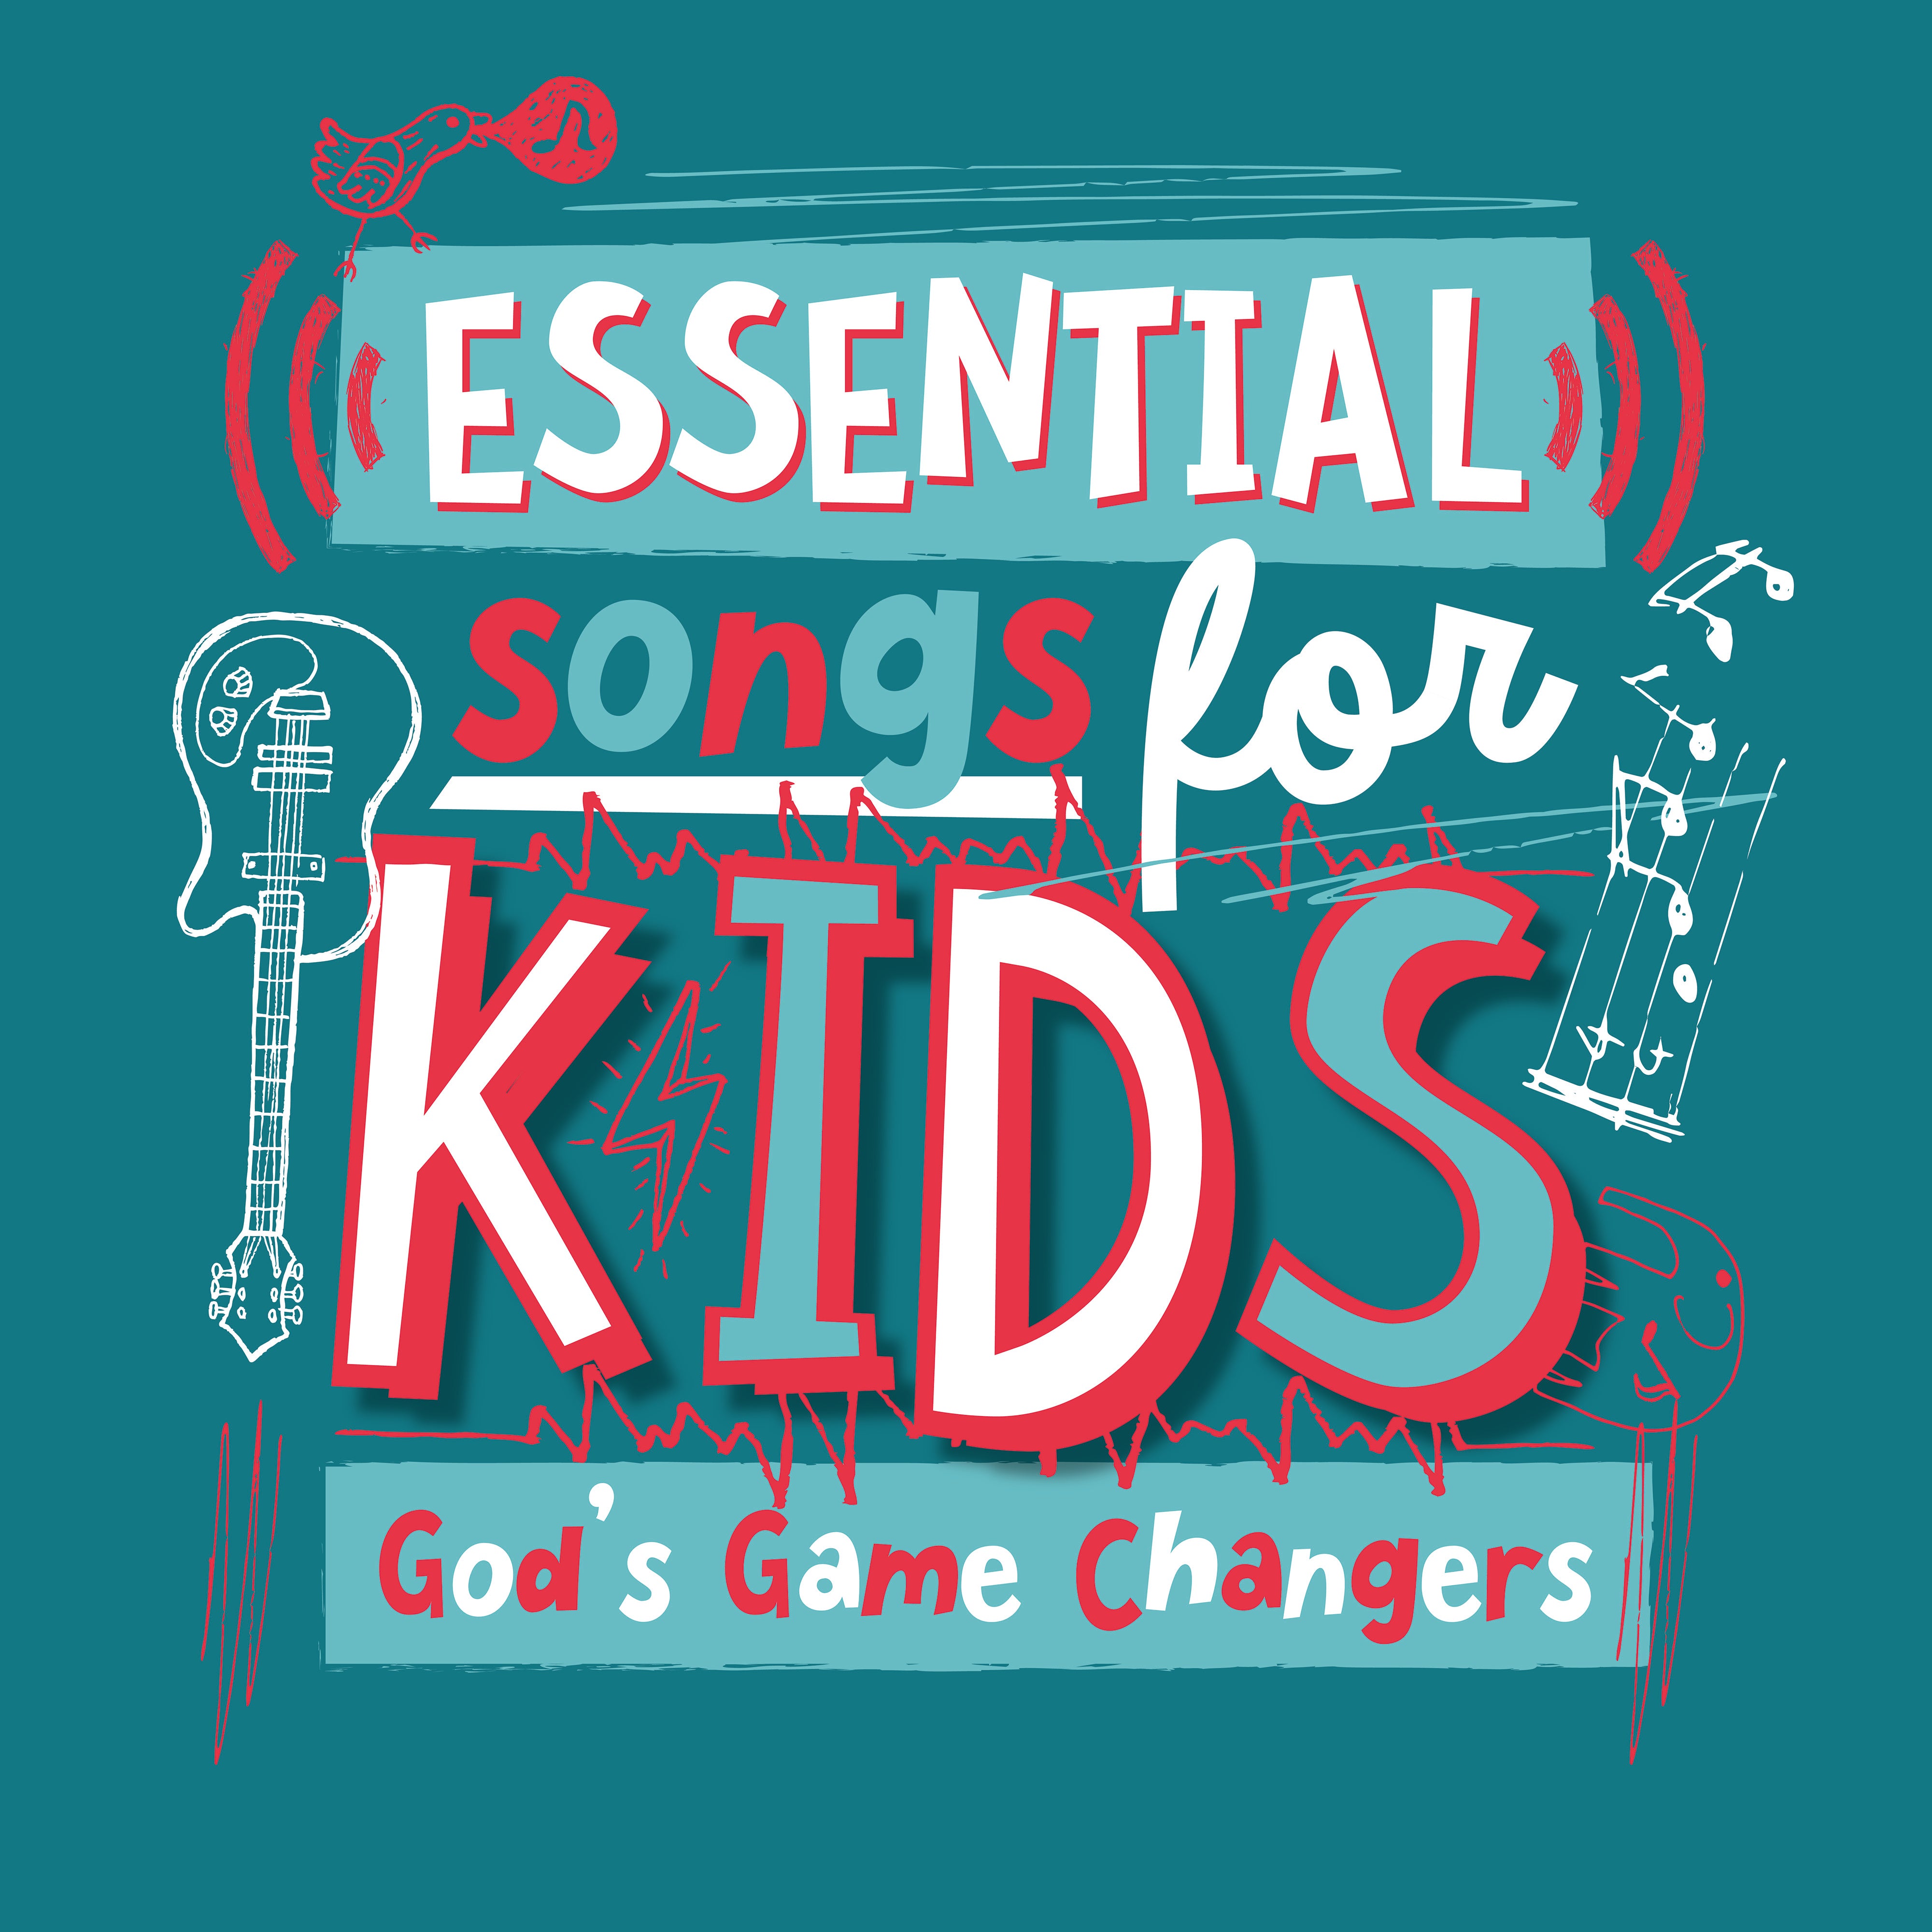 Image of Essential Songs For Kids - God's Game Changers other